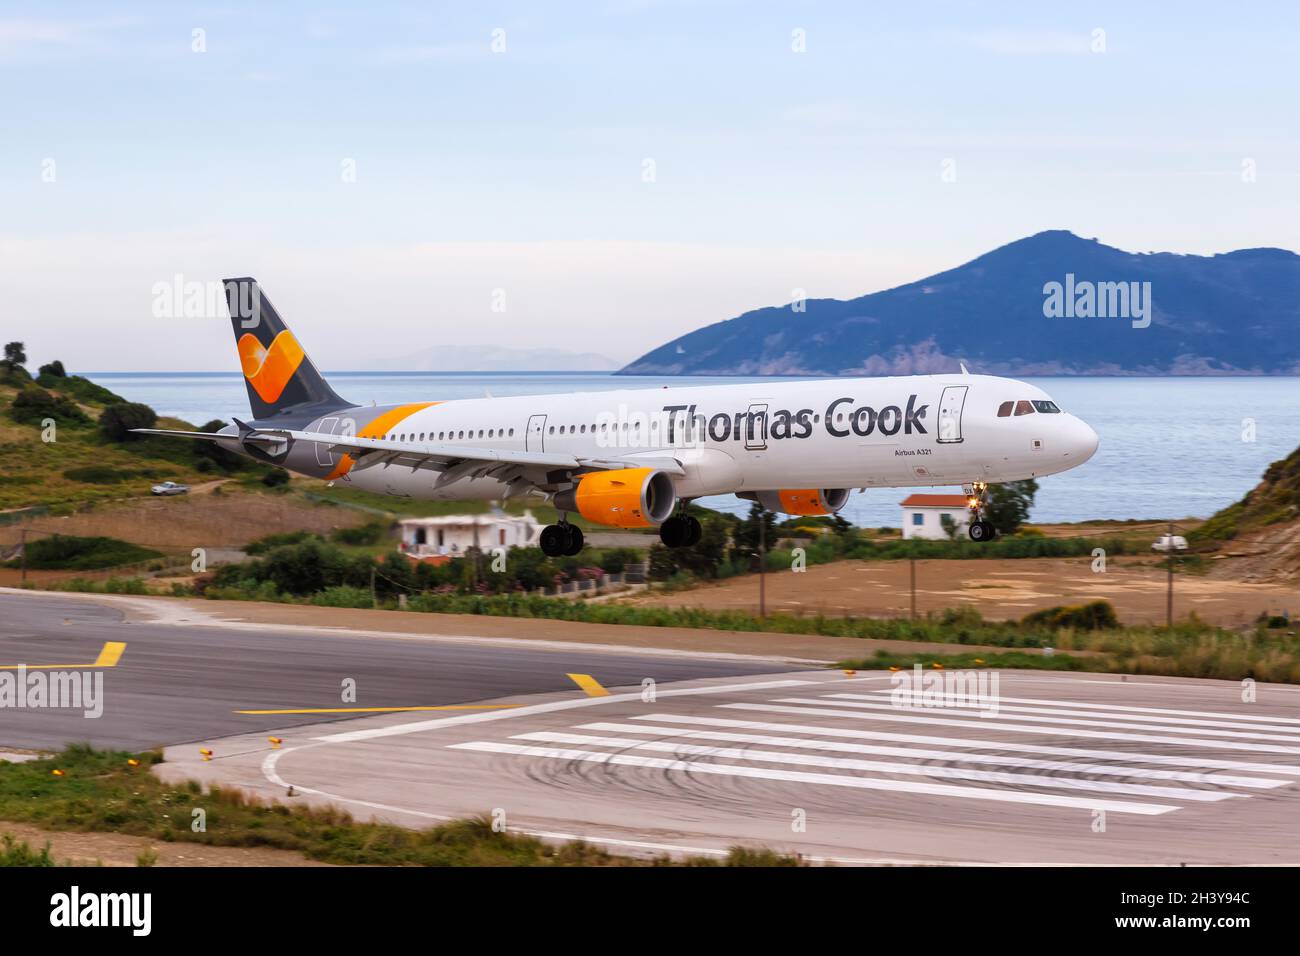 Thomas Cook Airlines Airbus A321 Aircraft Skiathos Airport in Griechenland Stockfoto